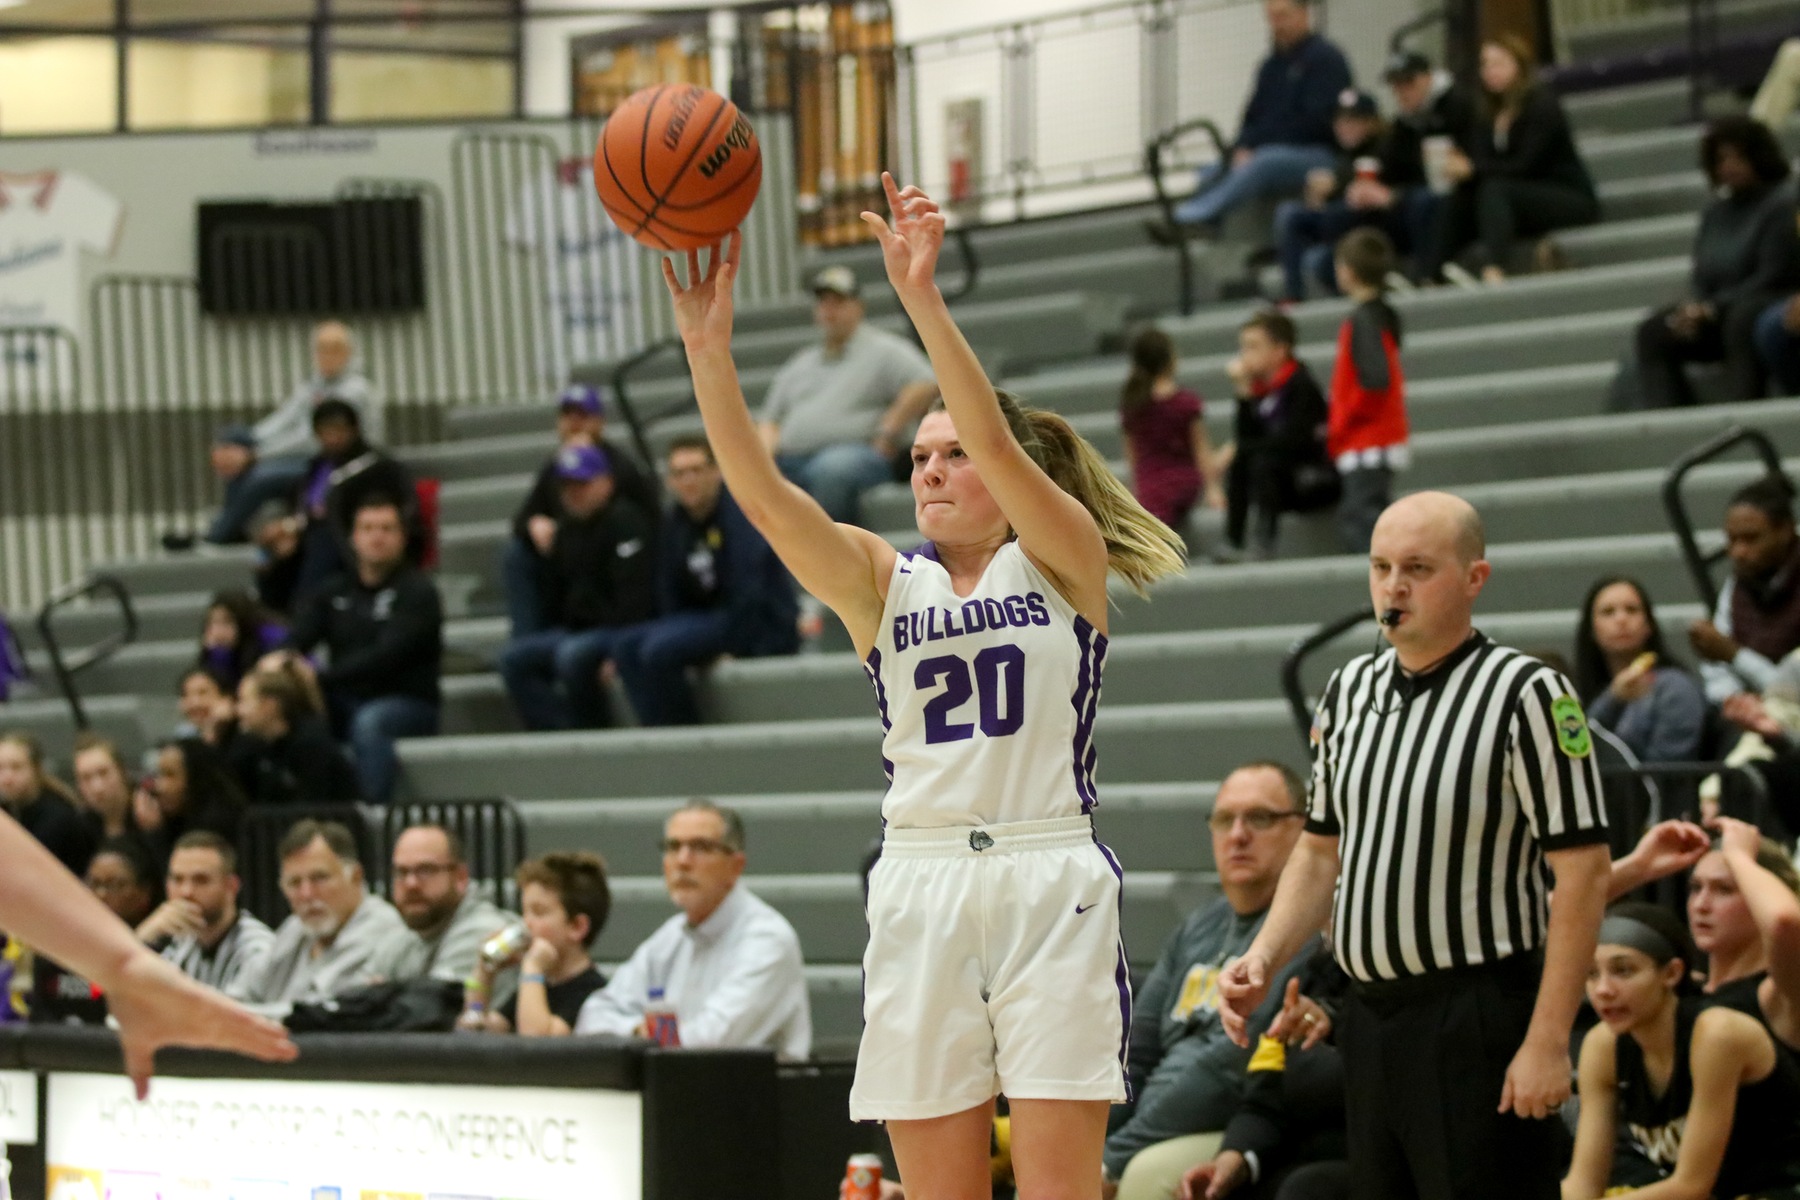 No.13/11 @bhsdogsghoops heads to New Castle for Raymond James HOF Classic